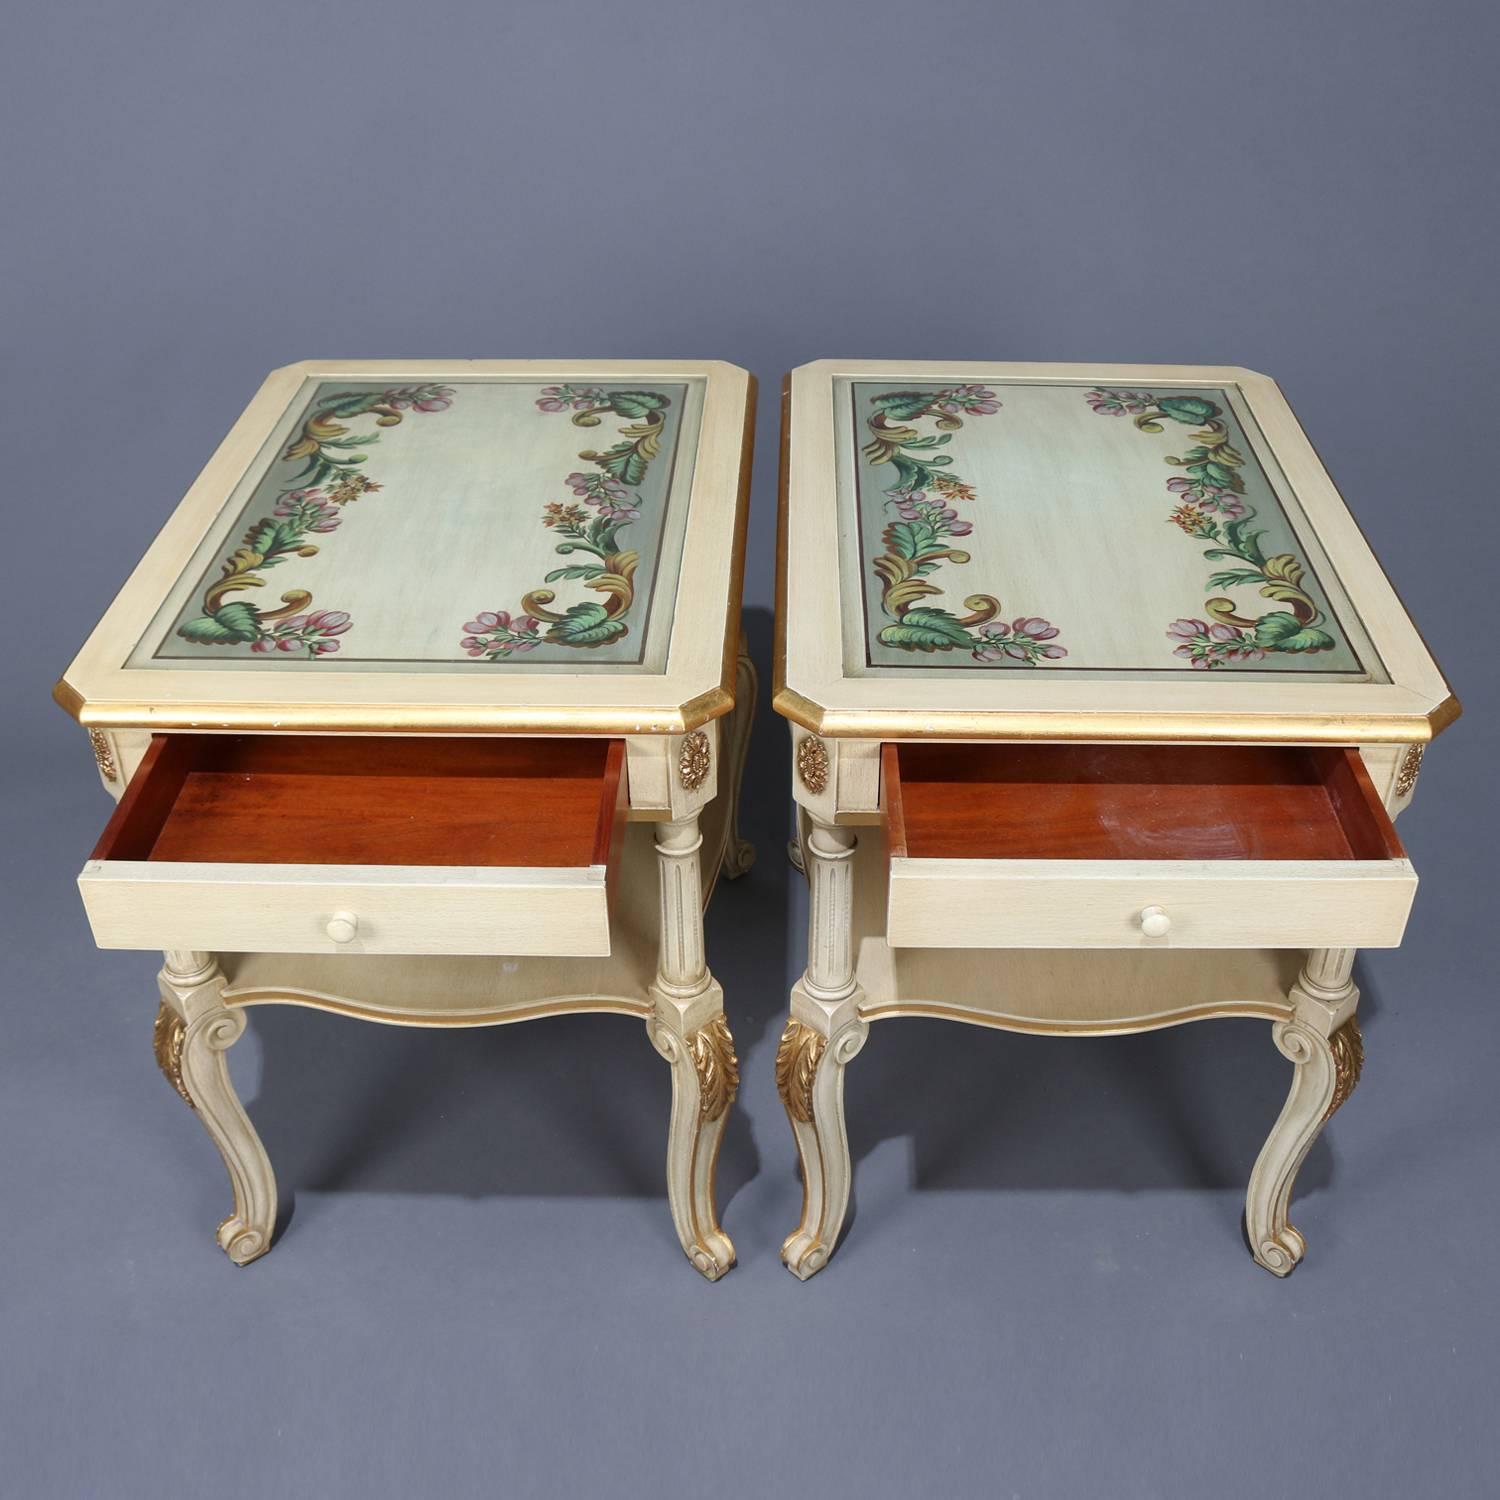 French Provincial Pair of Provincial Style Carved Gilt and Paint Decorated End Stands 20th Century